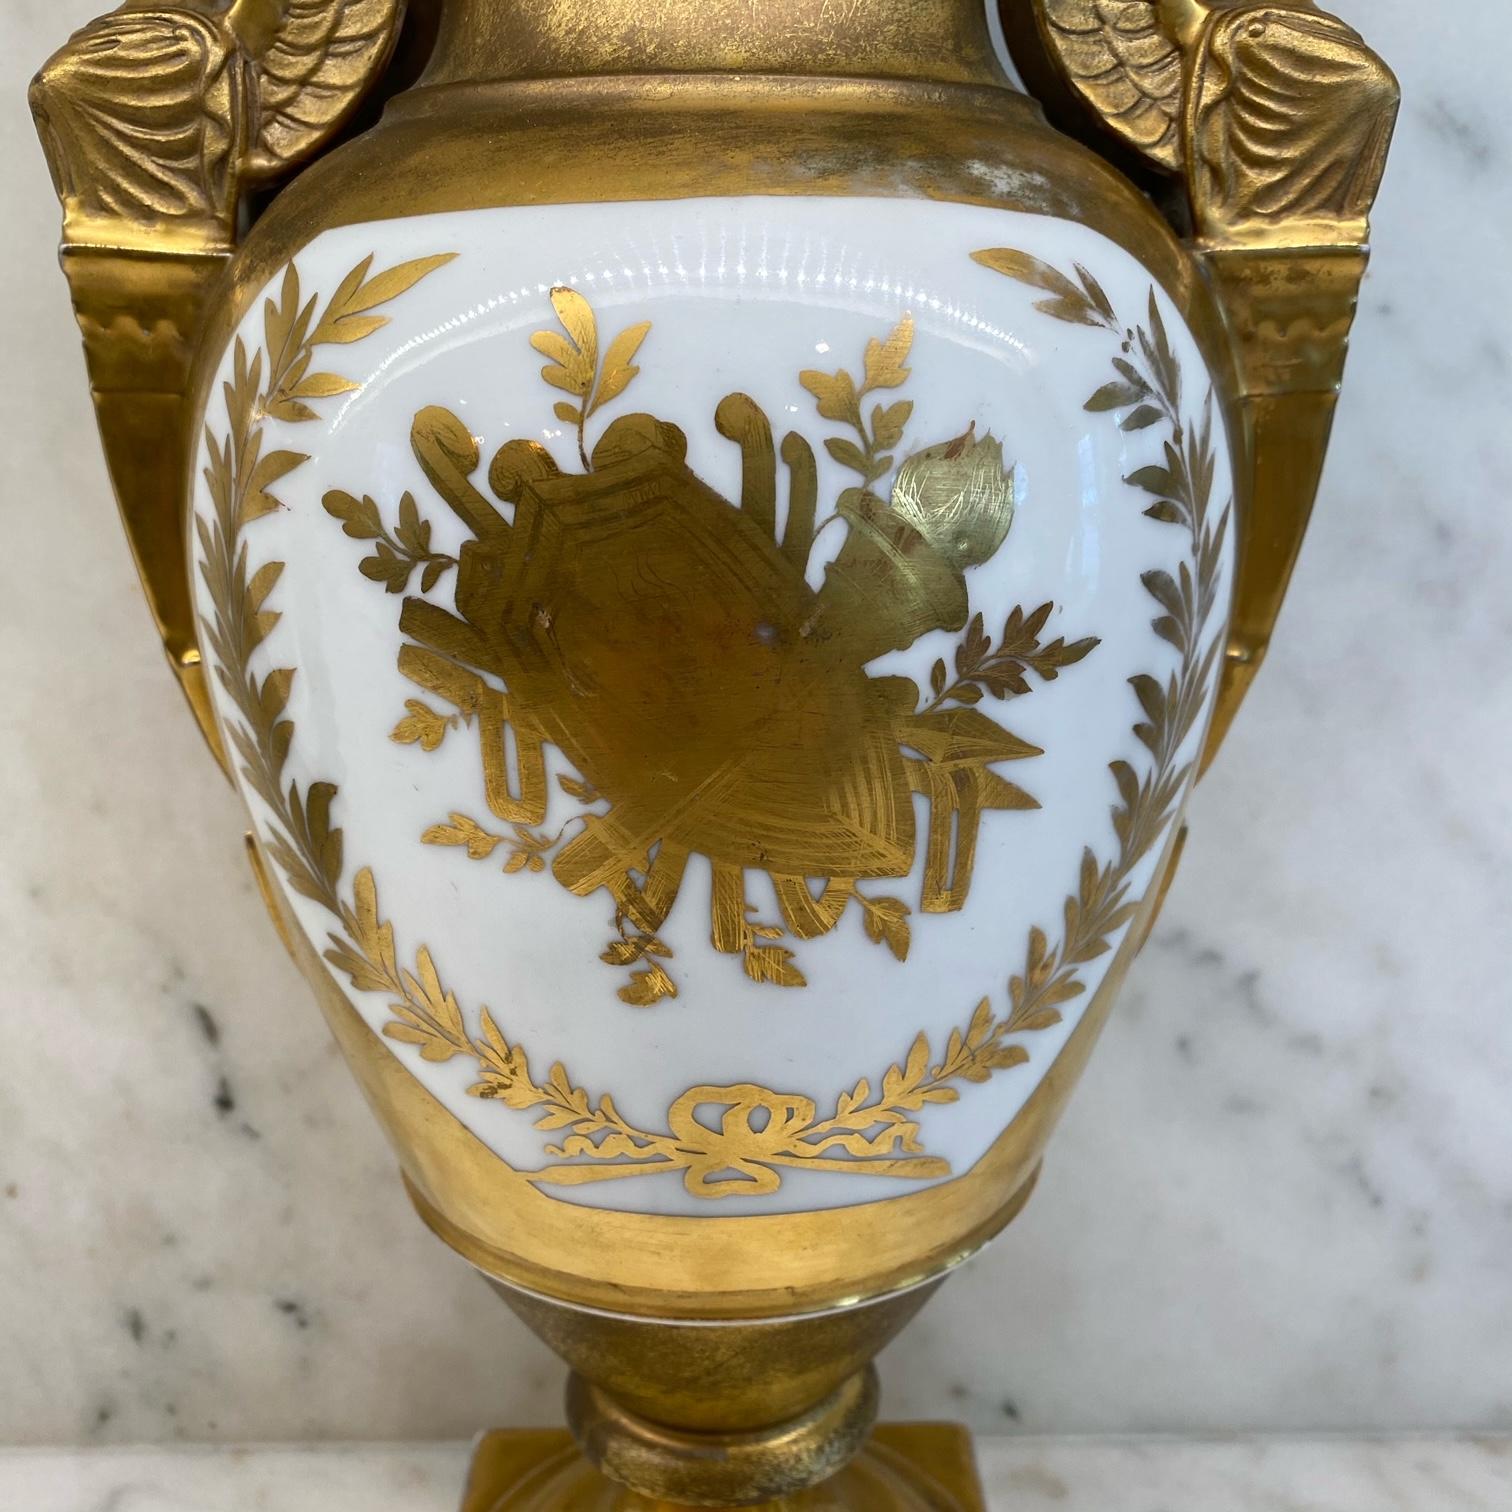 19th Century Important Antique French Hand Painted Gold Gilt Vase Depicting Ships in Battle For Sale